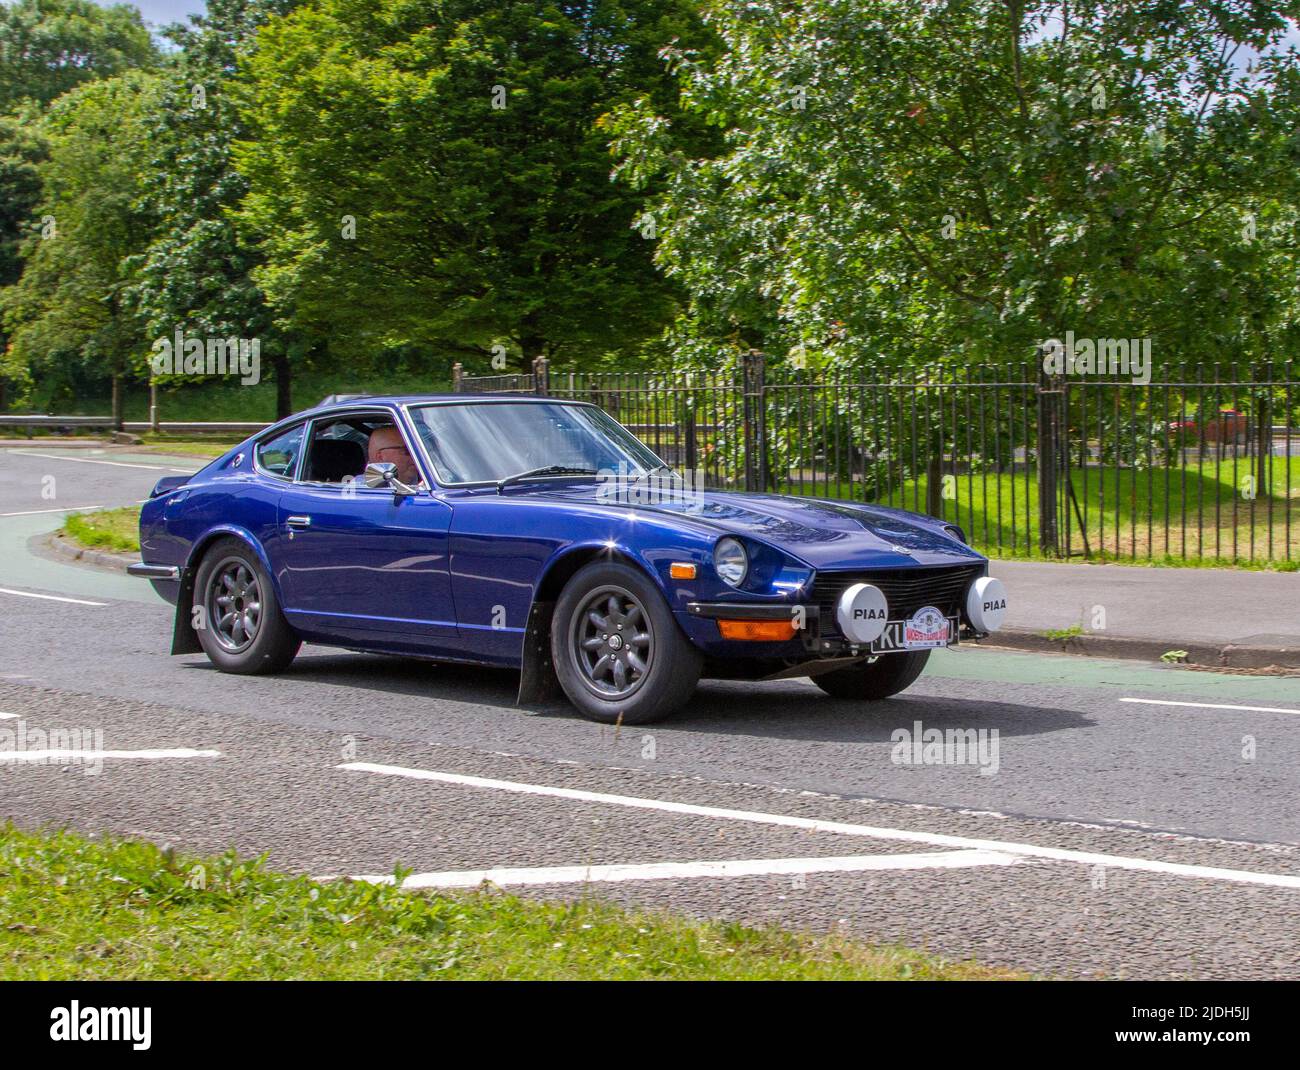 1971 70s seventies blue DATSUN 240Z sports coupe; automobiles featured during the 58th year of the Manchester to Blackpool Touring Assembly for Veteran, Vintage, Classic and Cherished cars. Stock Photo